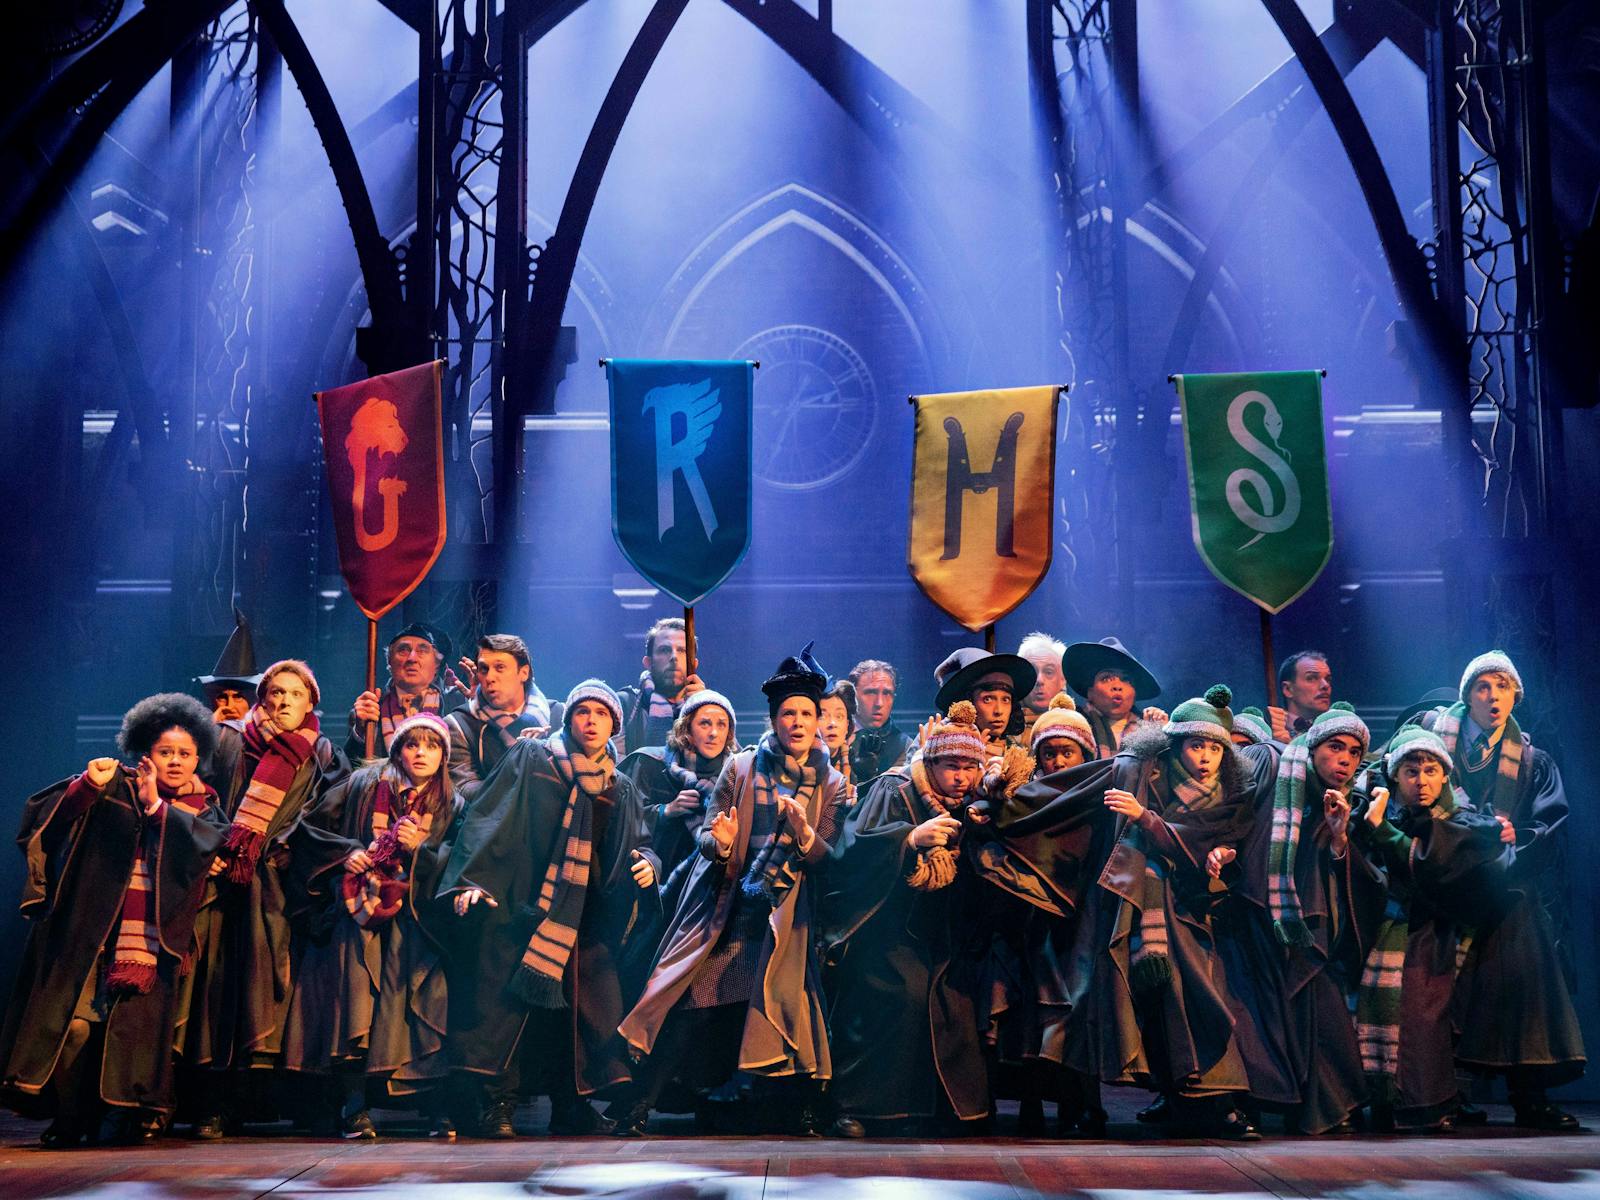 Image for Harry Potter and the Cursed Child